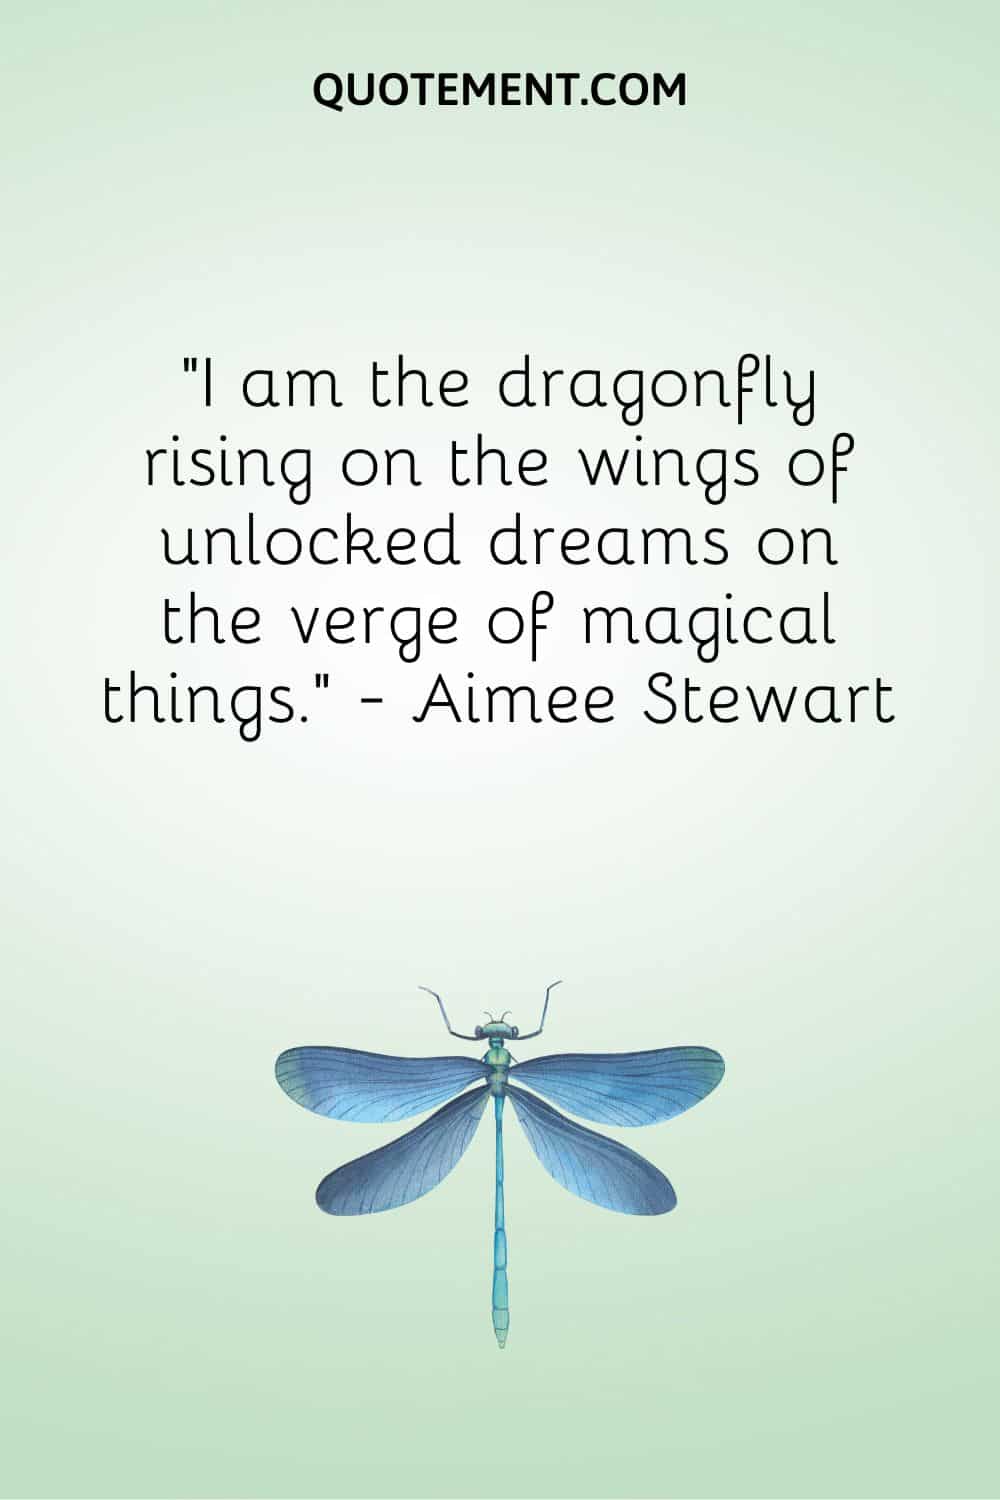 I am the dragonfly rising on the wings of unlocked dreams on the verge of magical things